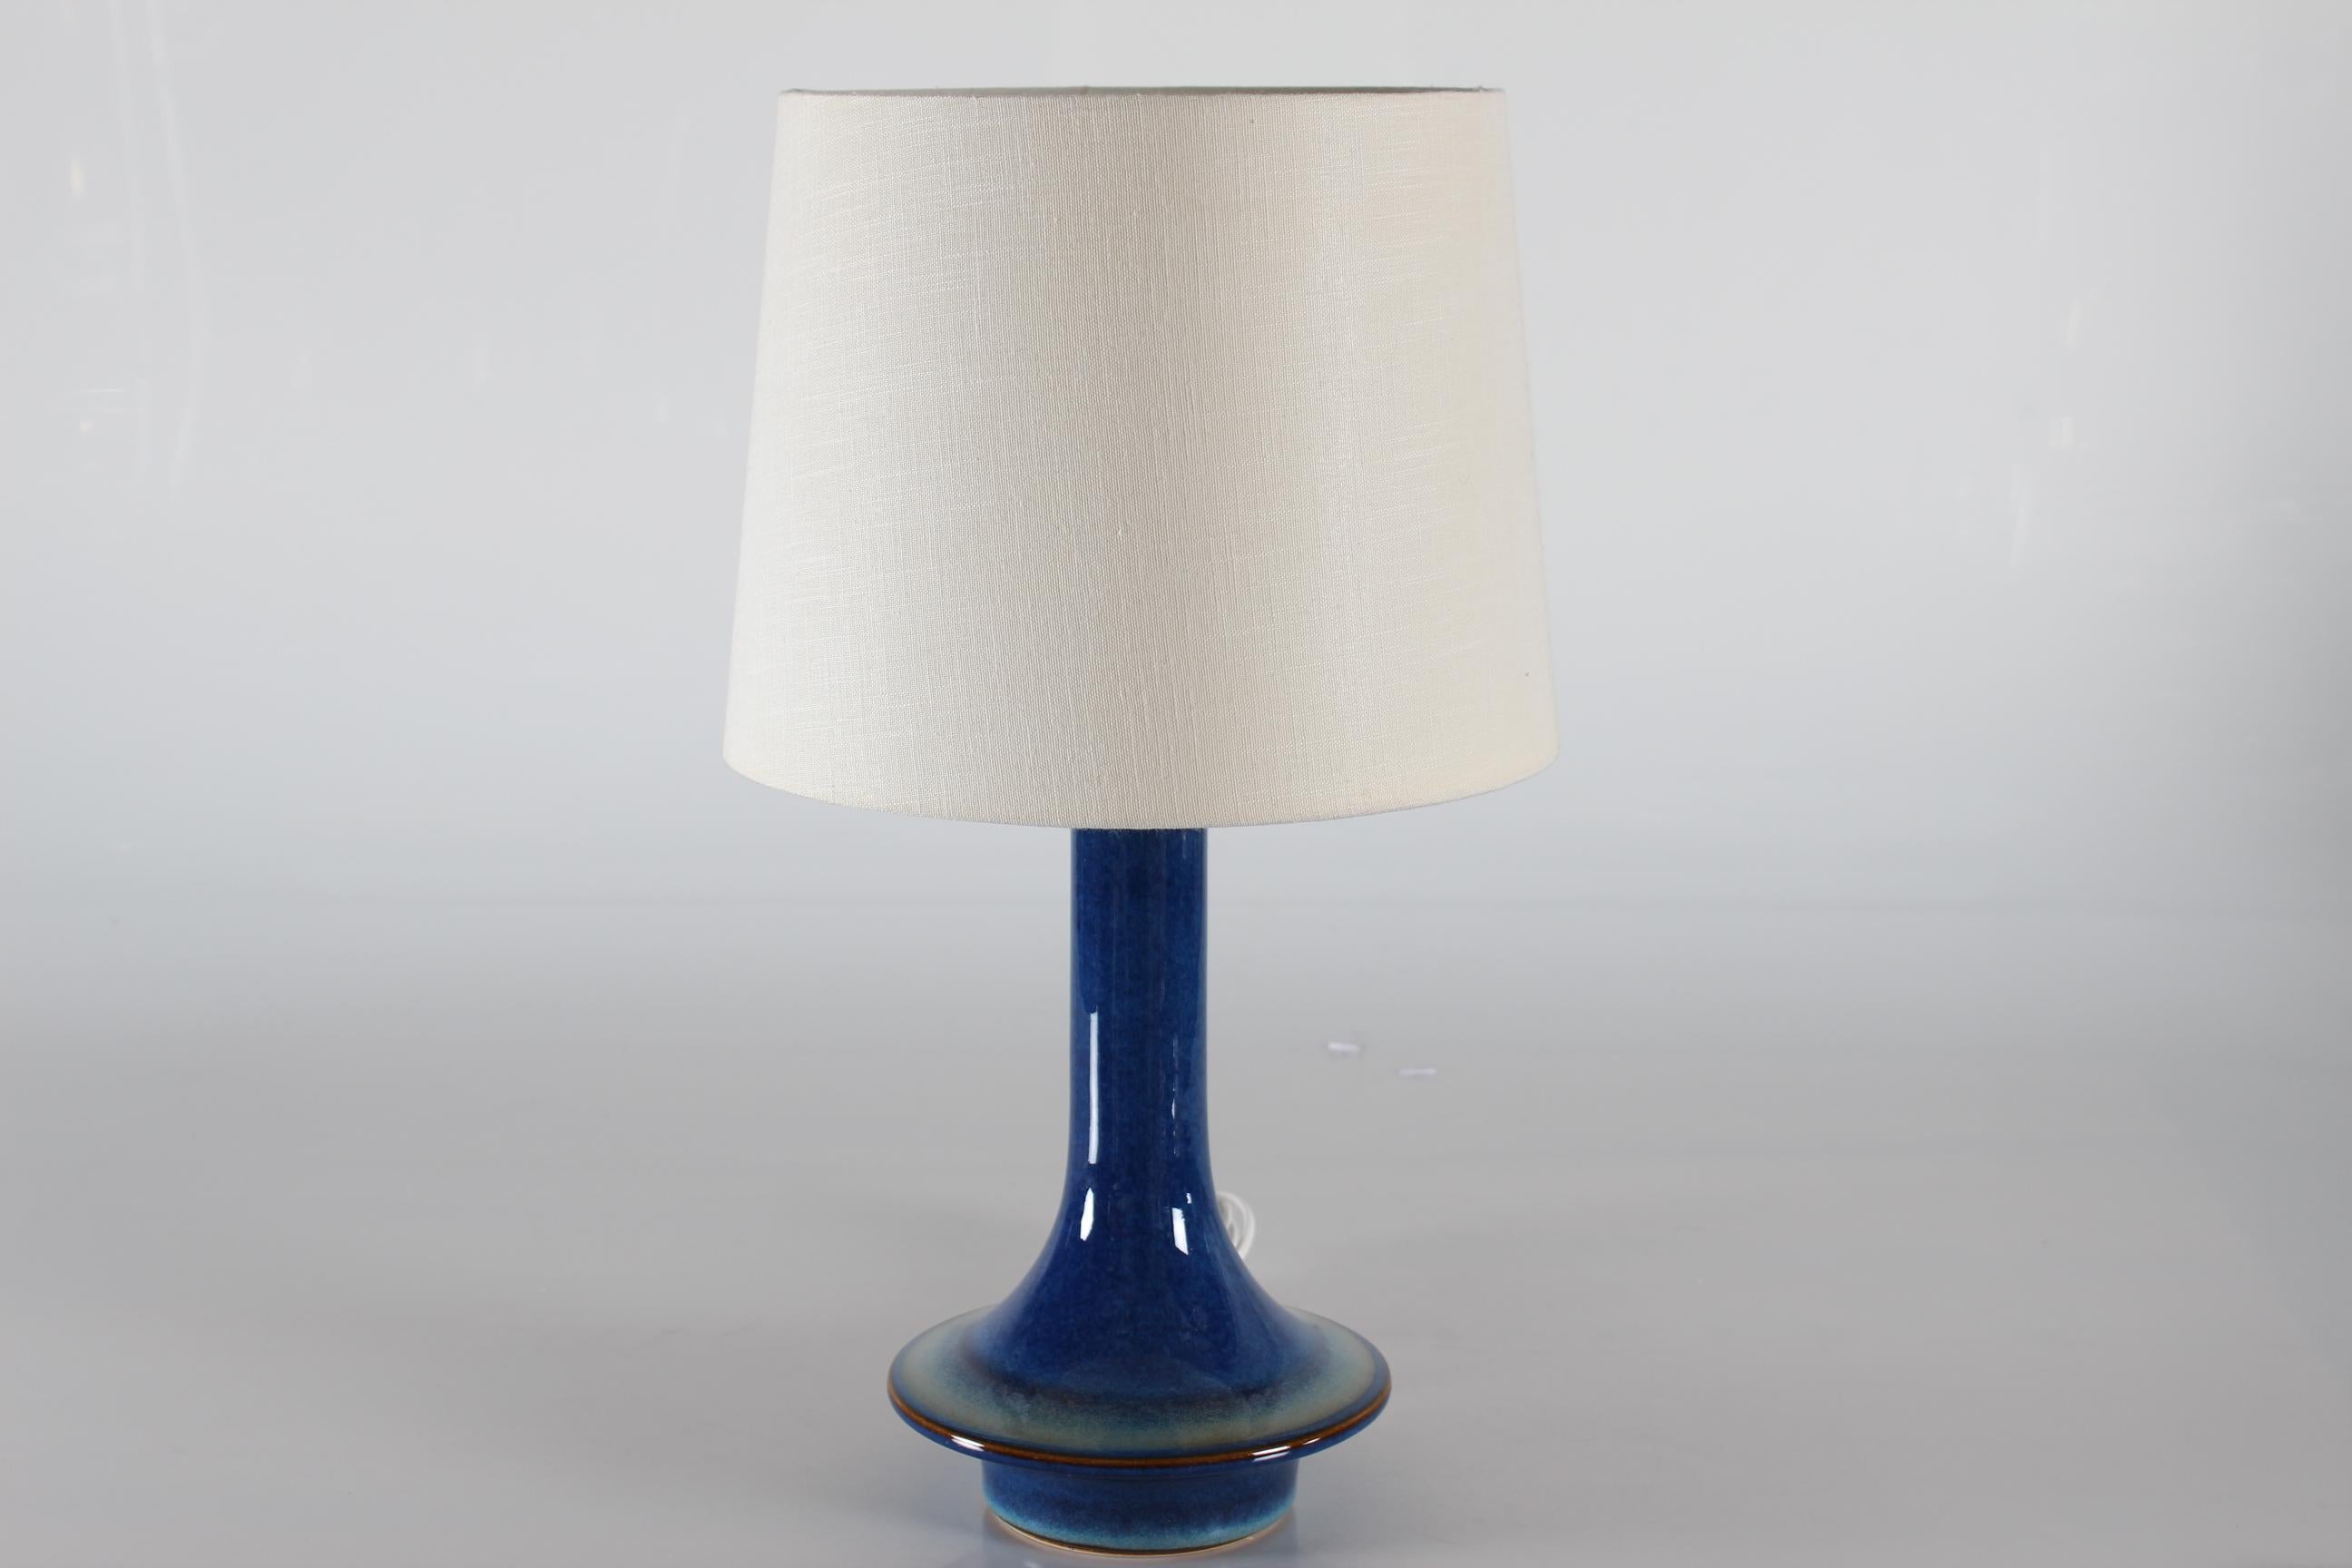 Danish Søholm Sculptural Ufo Shaped Table Lamp Blue Notes 1960s In Good Condition For Sale In Aarhus C, DK